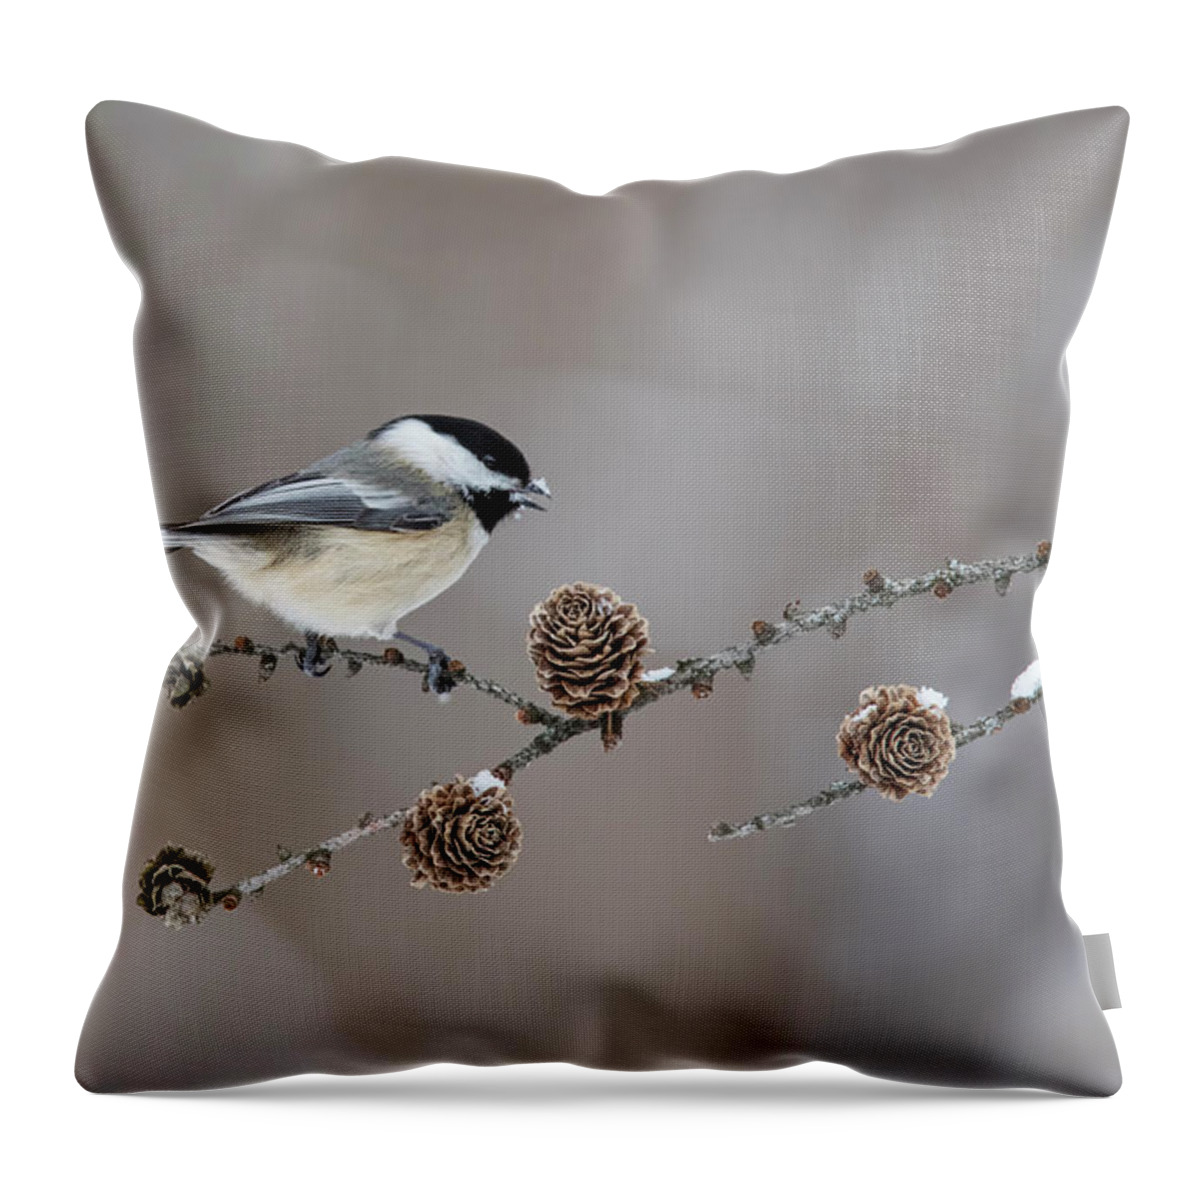 Black-capped Throw Pillow featuring the photograph Black-capped Chickadee by Mircea Costina Photography